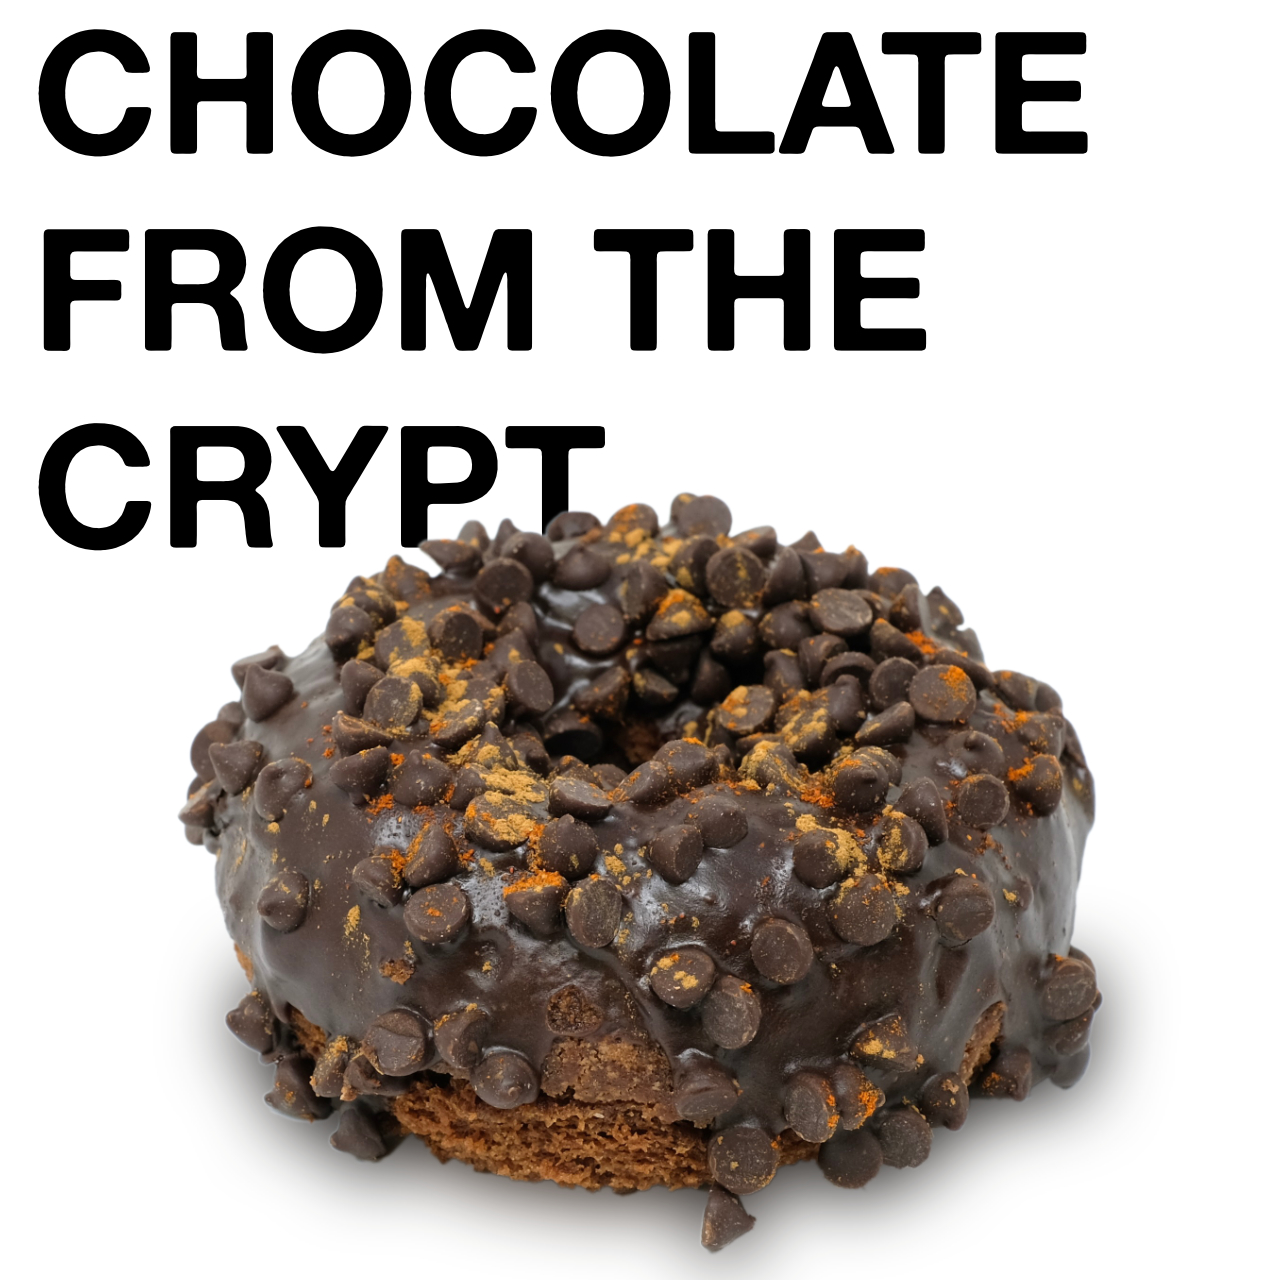 Chocolate from the Crypt